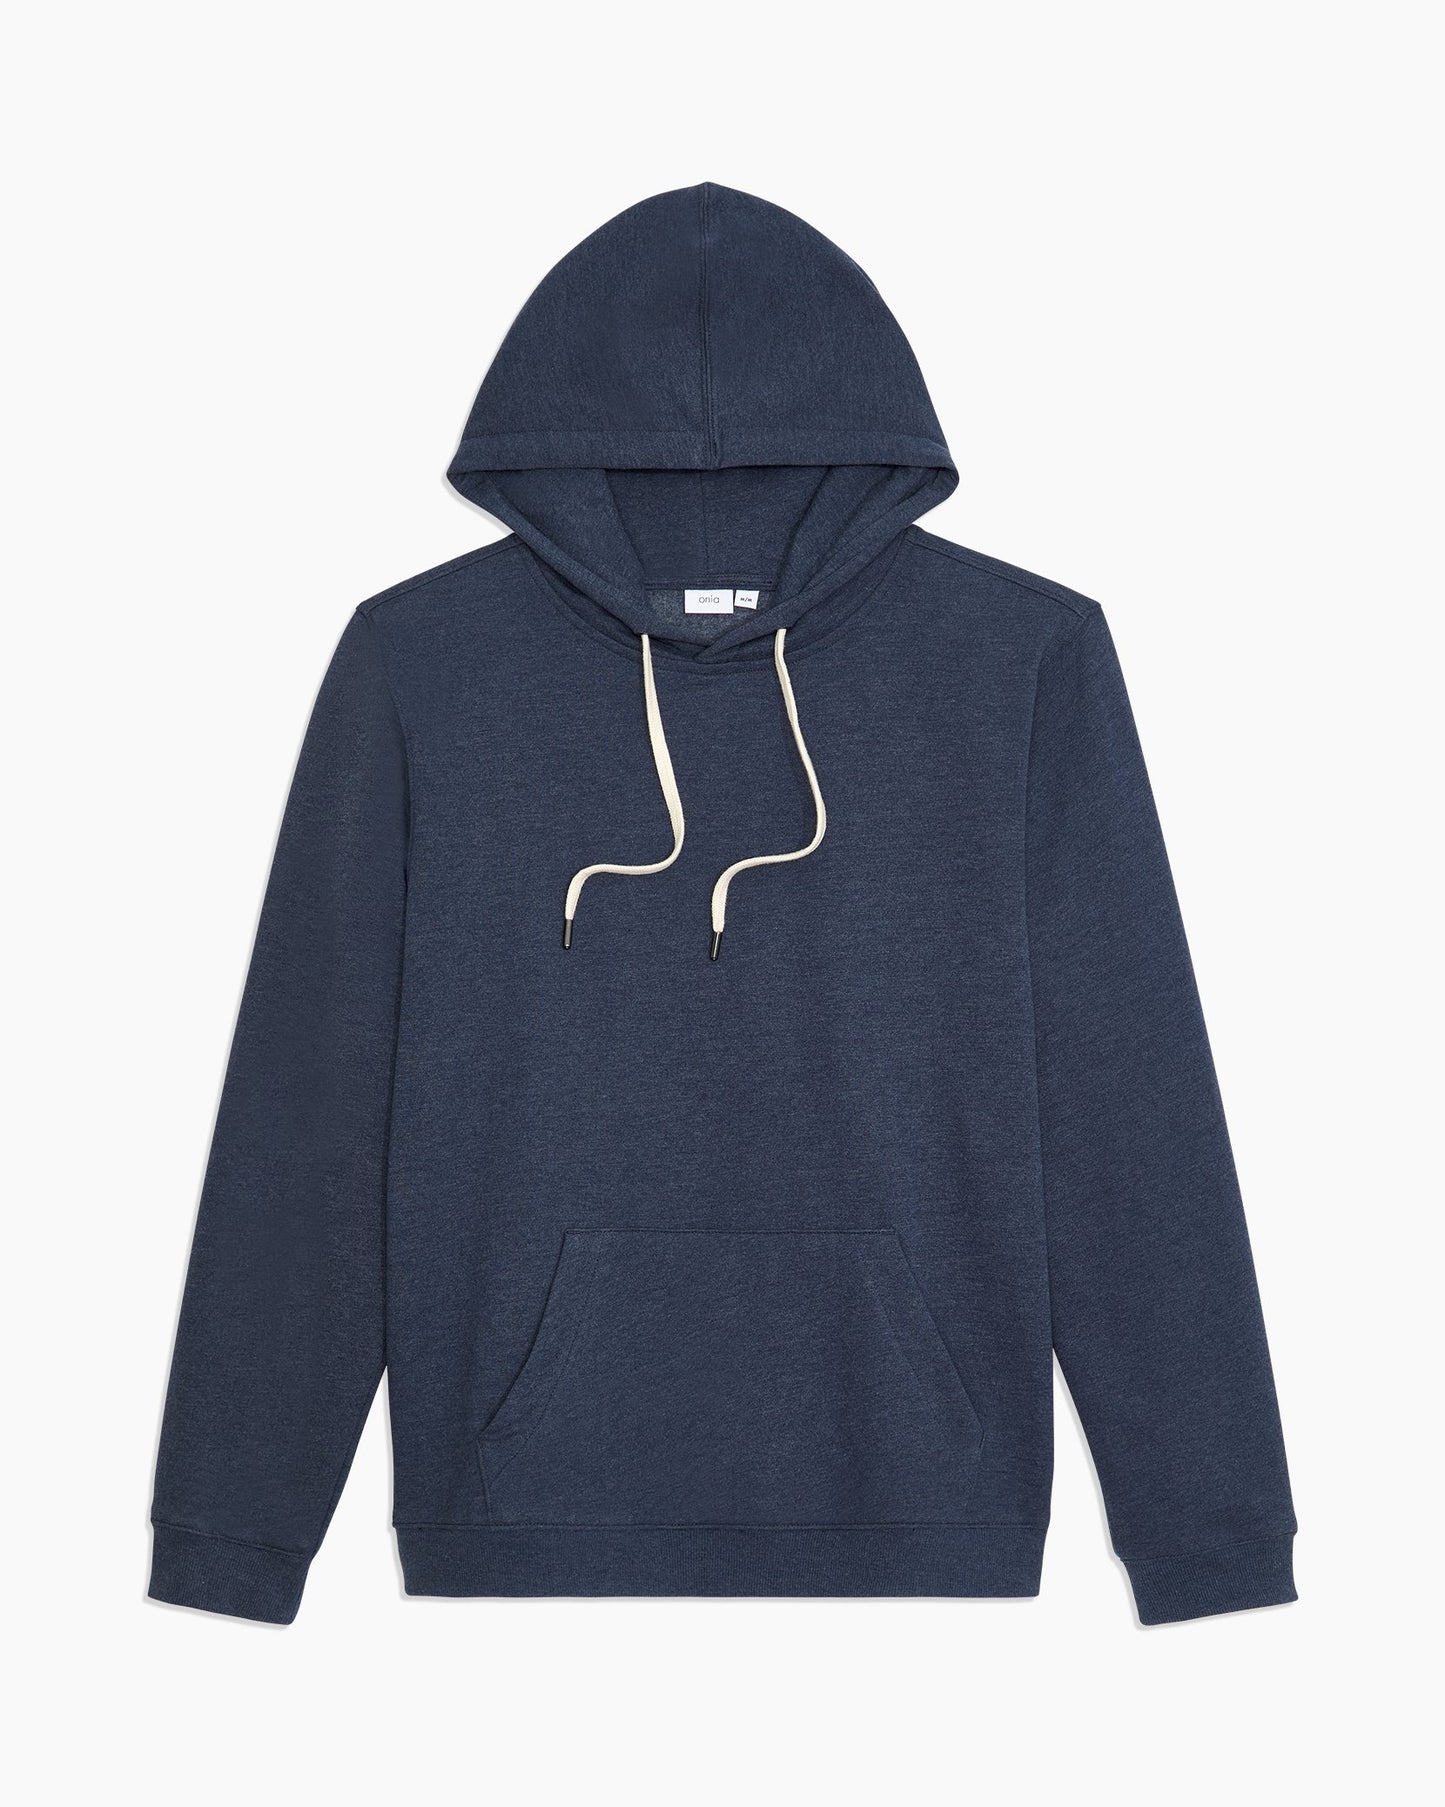 HEATHERED FRENCH TERRY HOODIE